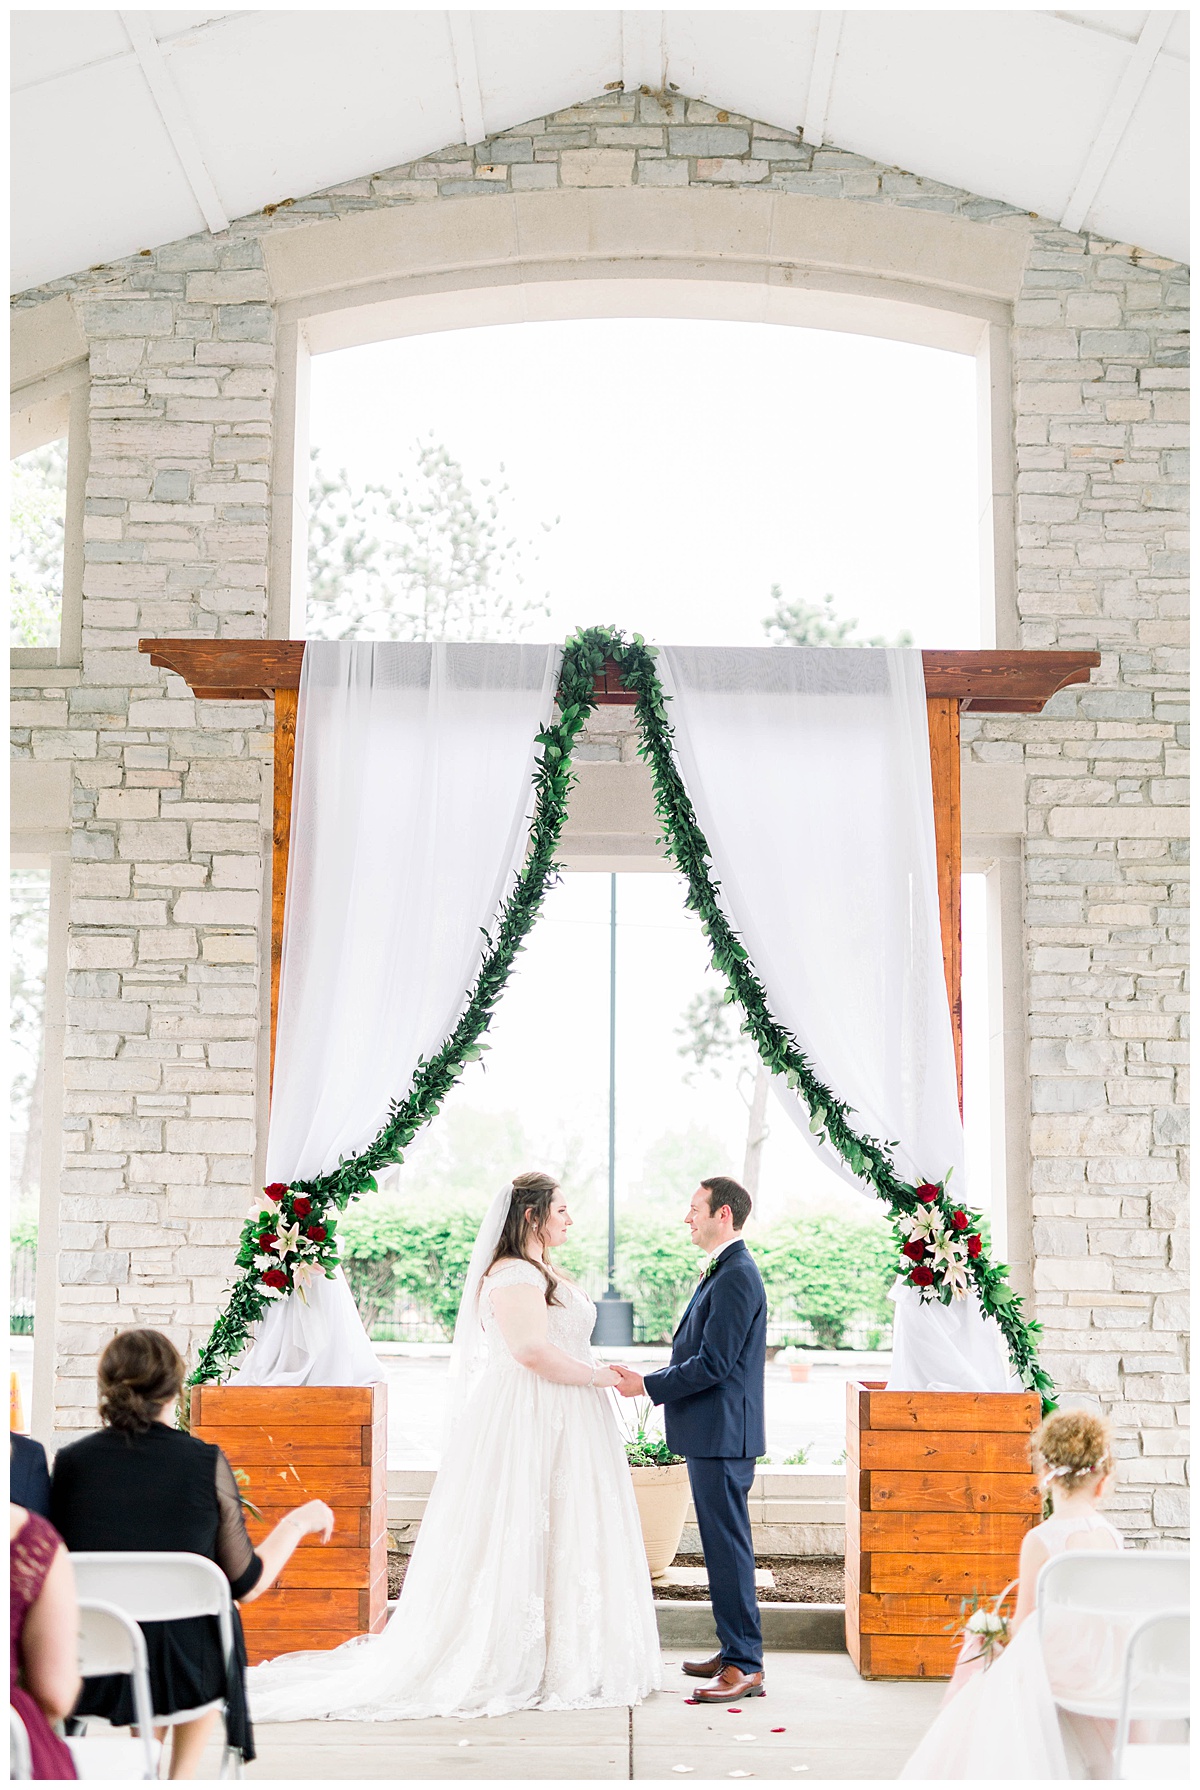 Bright DeSigns by the Kanes | Wedding Planner in the Quad Cities | Sarah Sunstrom Photography 21.jpg